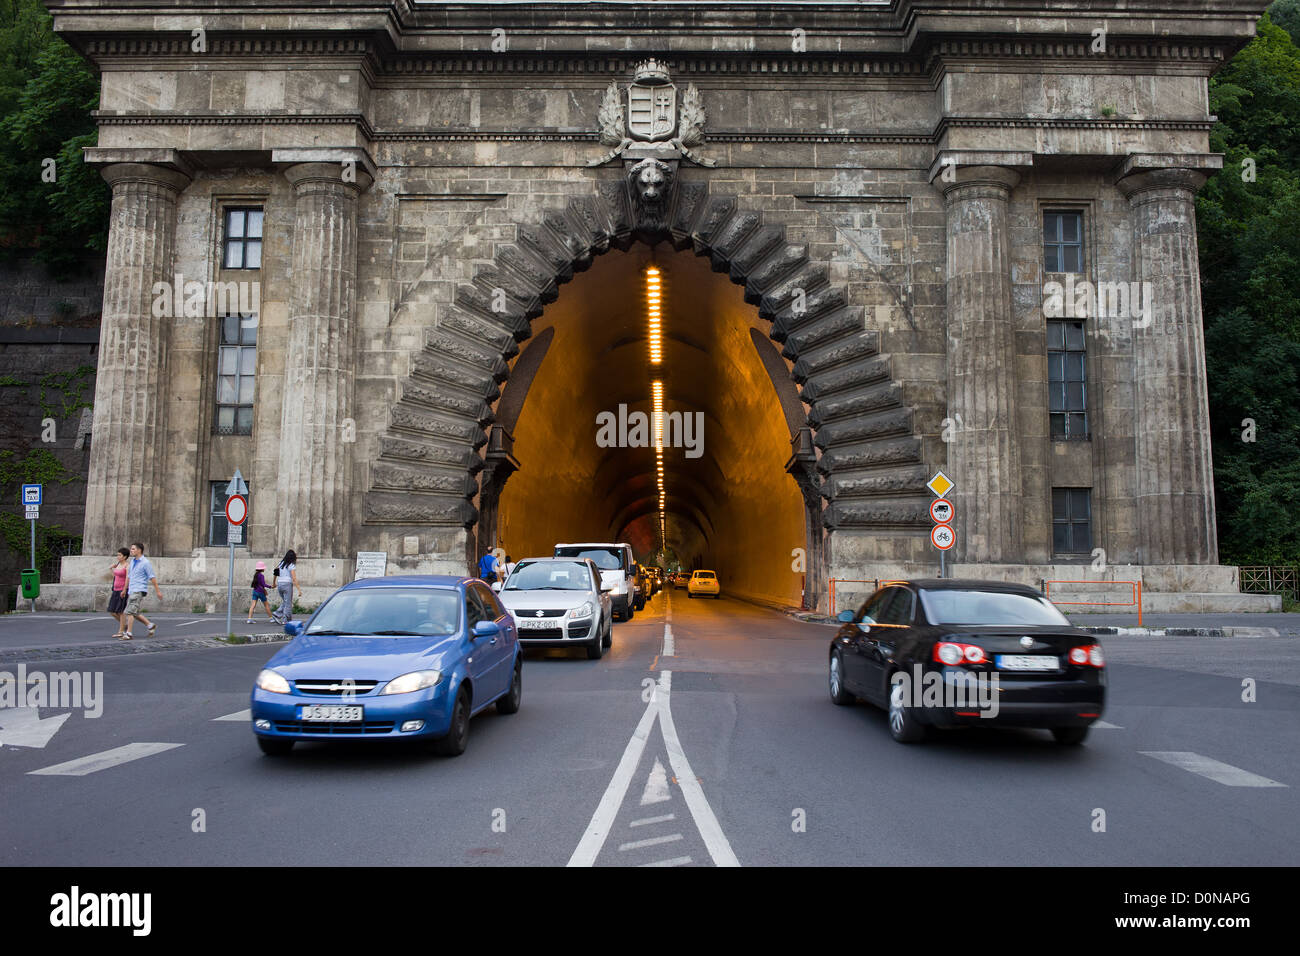 Buda Tunnel under the Castle Hill, opened in 1856, 350 meters long, located in the city of Budapest, Hungary. Stock Photo